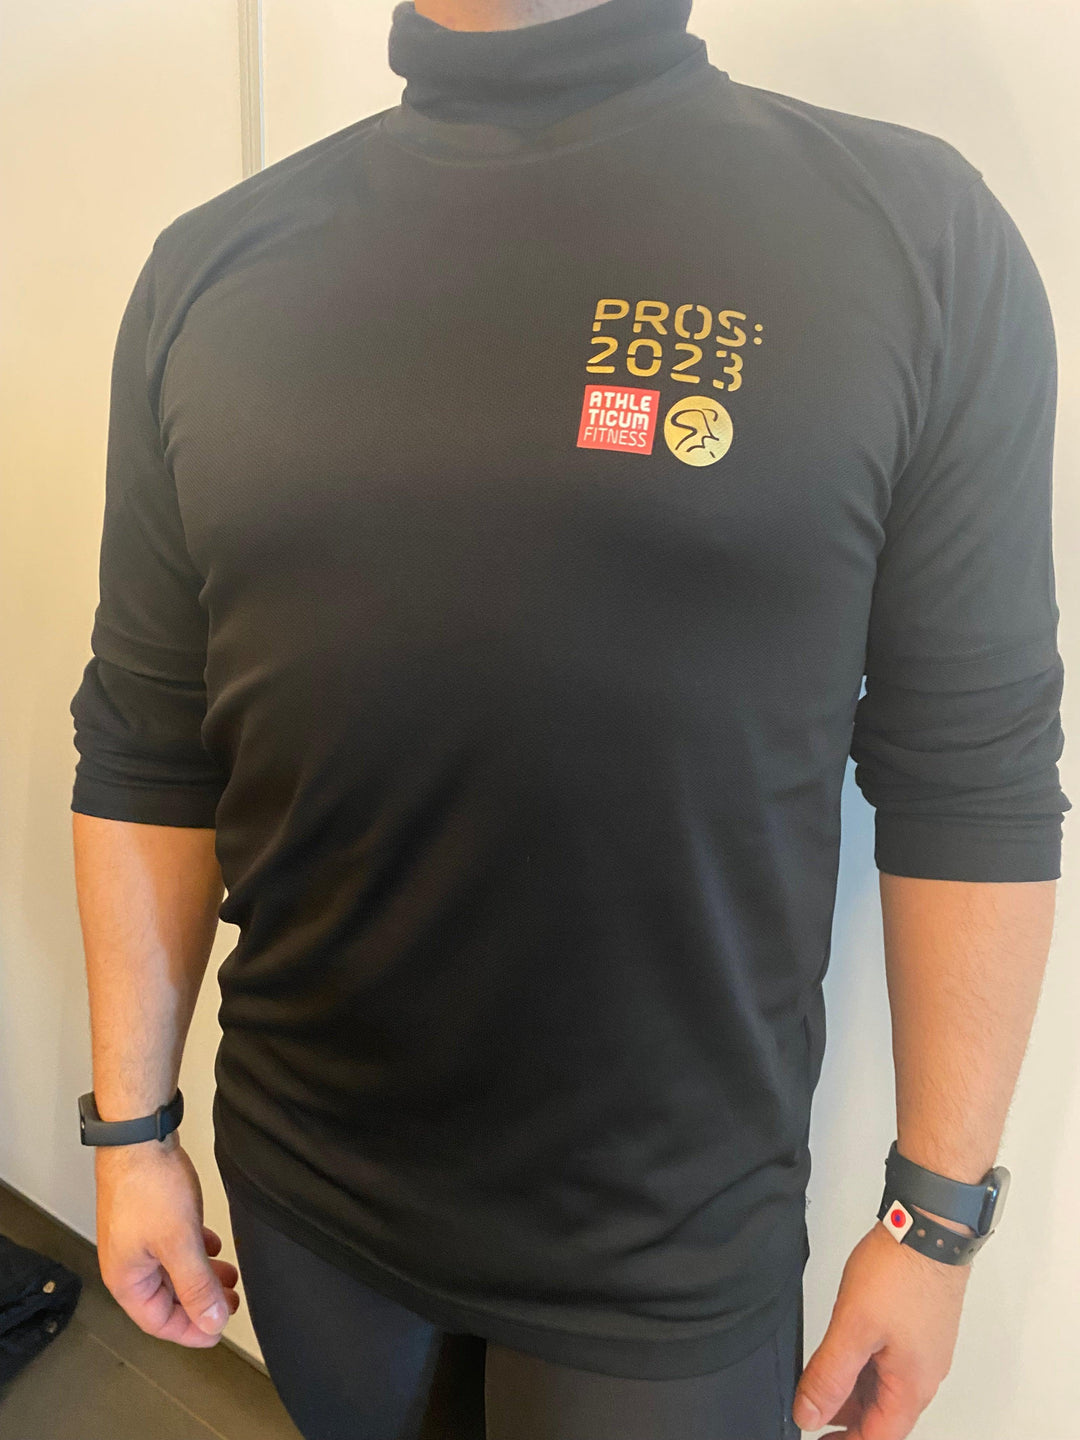 PROS:2023 Technical T-Shirts MALE - Athleticum Fitness